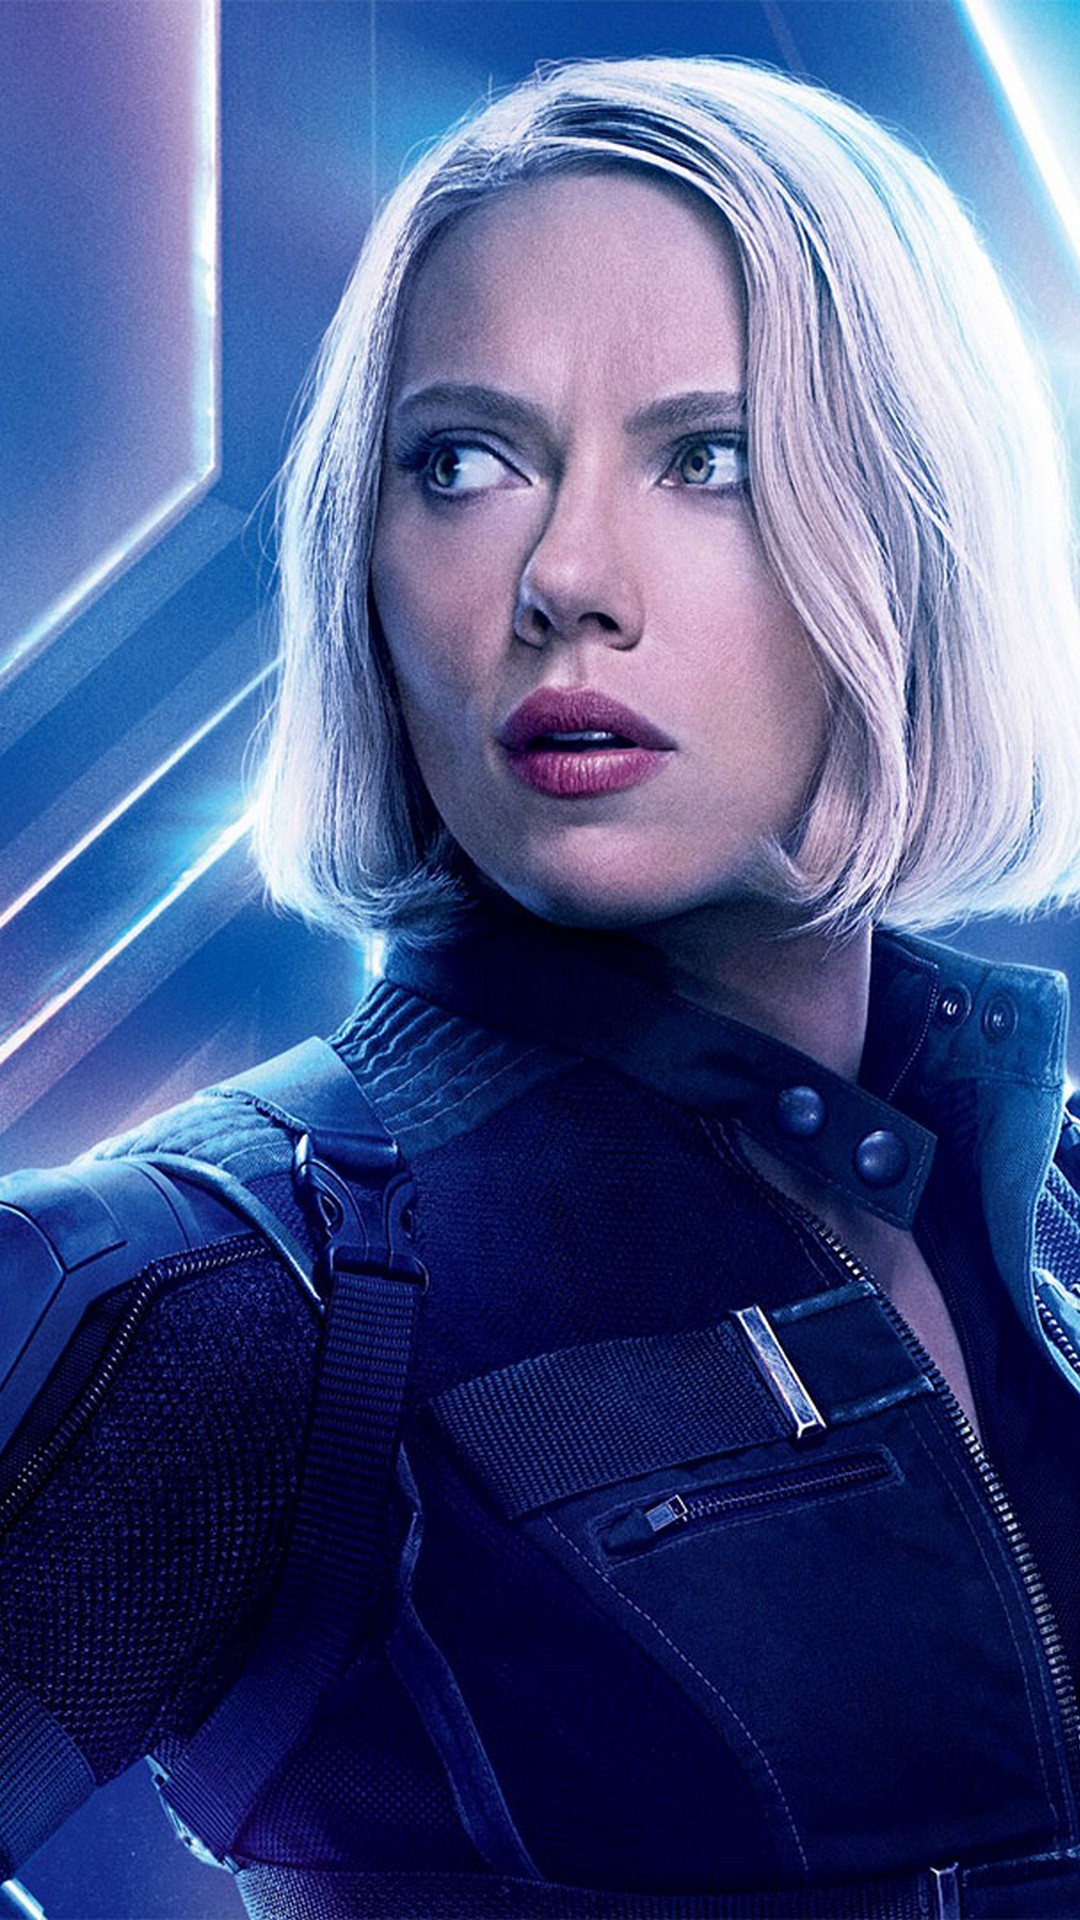 Black Widow Avengers Endgame iPhone Wallpaper with high-resolution 1080x1920 pixel. You can use this poster wallpaper for your Desktop Computers, Mac Screensavers, Windows Backgrounds, iPhone Wallpapers, Tablet or Android Lock screen and another Mobile device